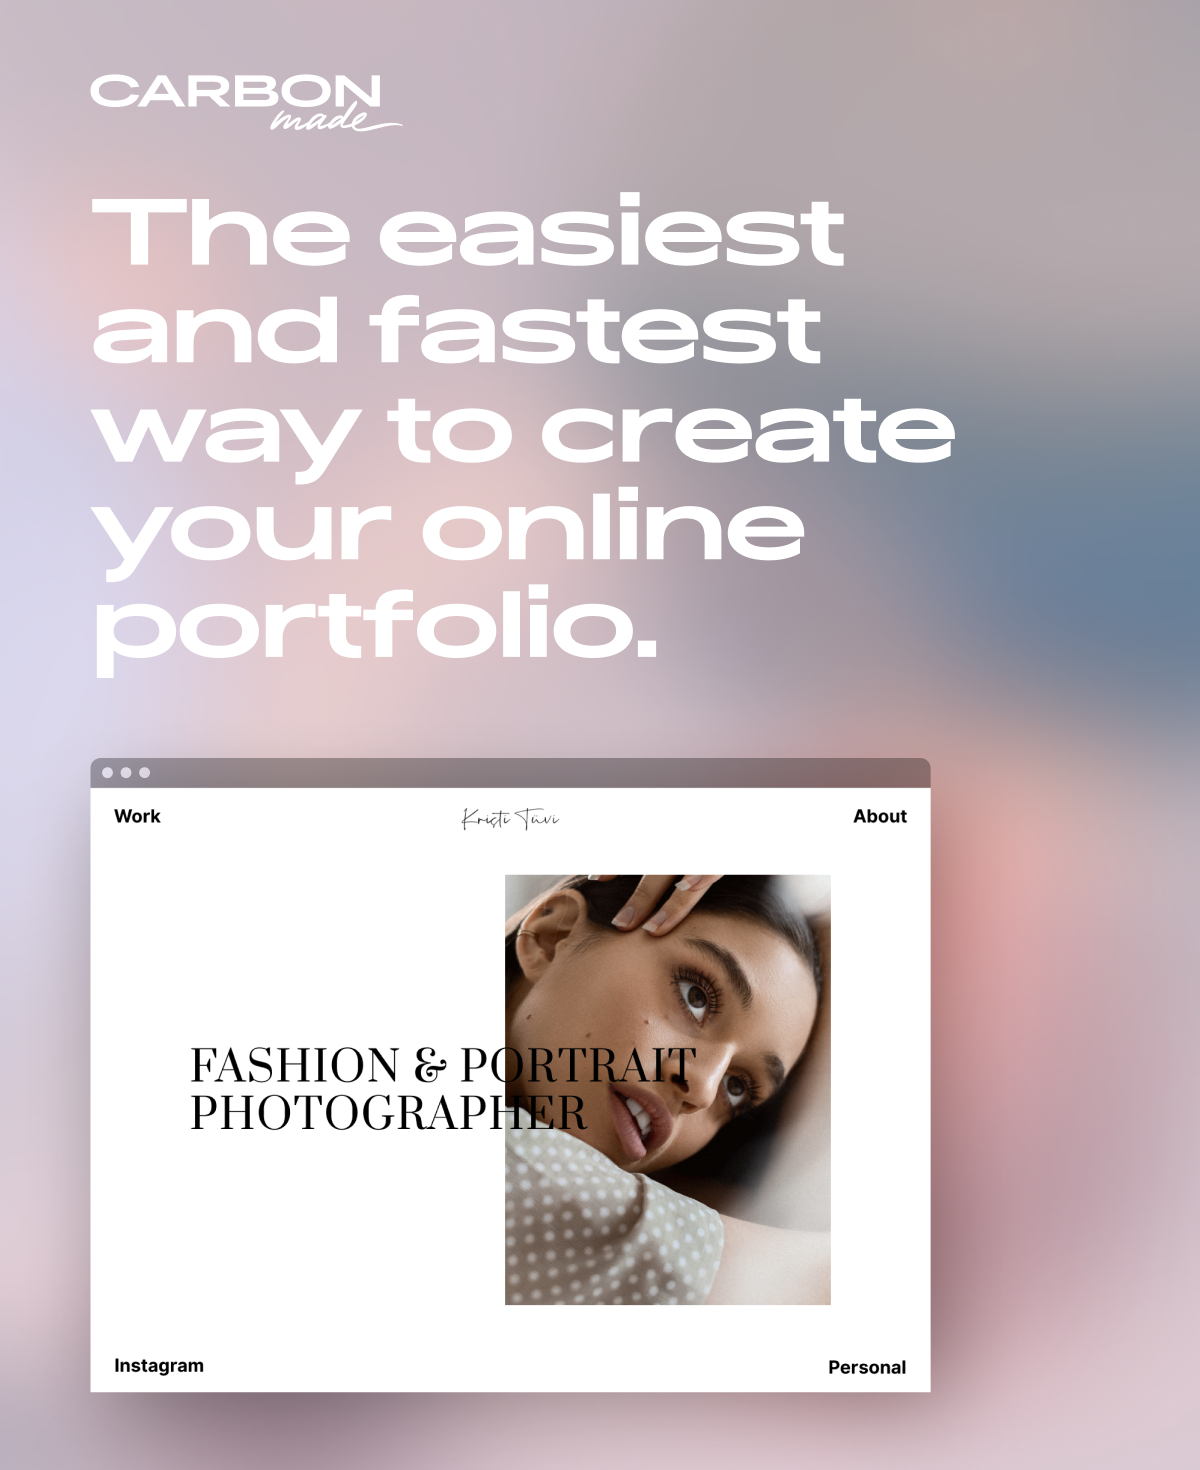 Carbonmade: The easiest and fastest way to create your online portfolio